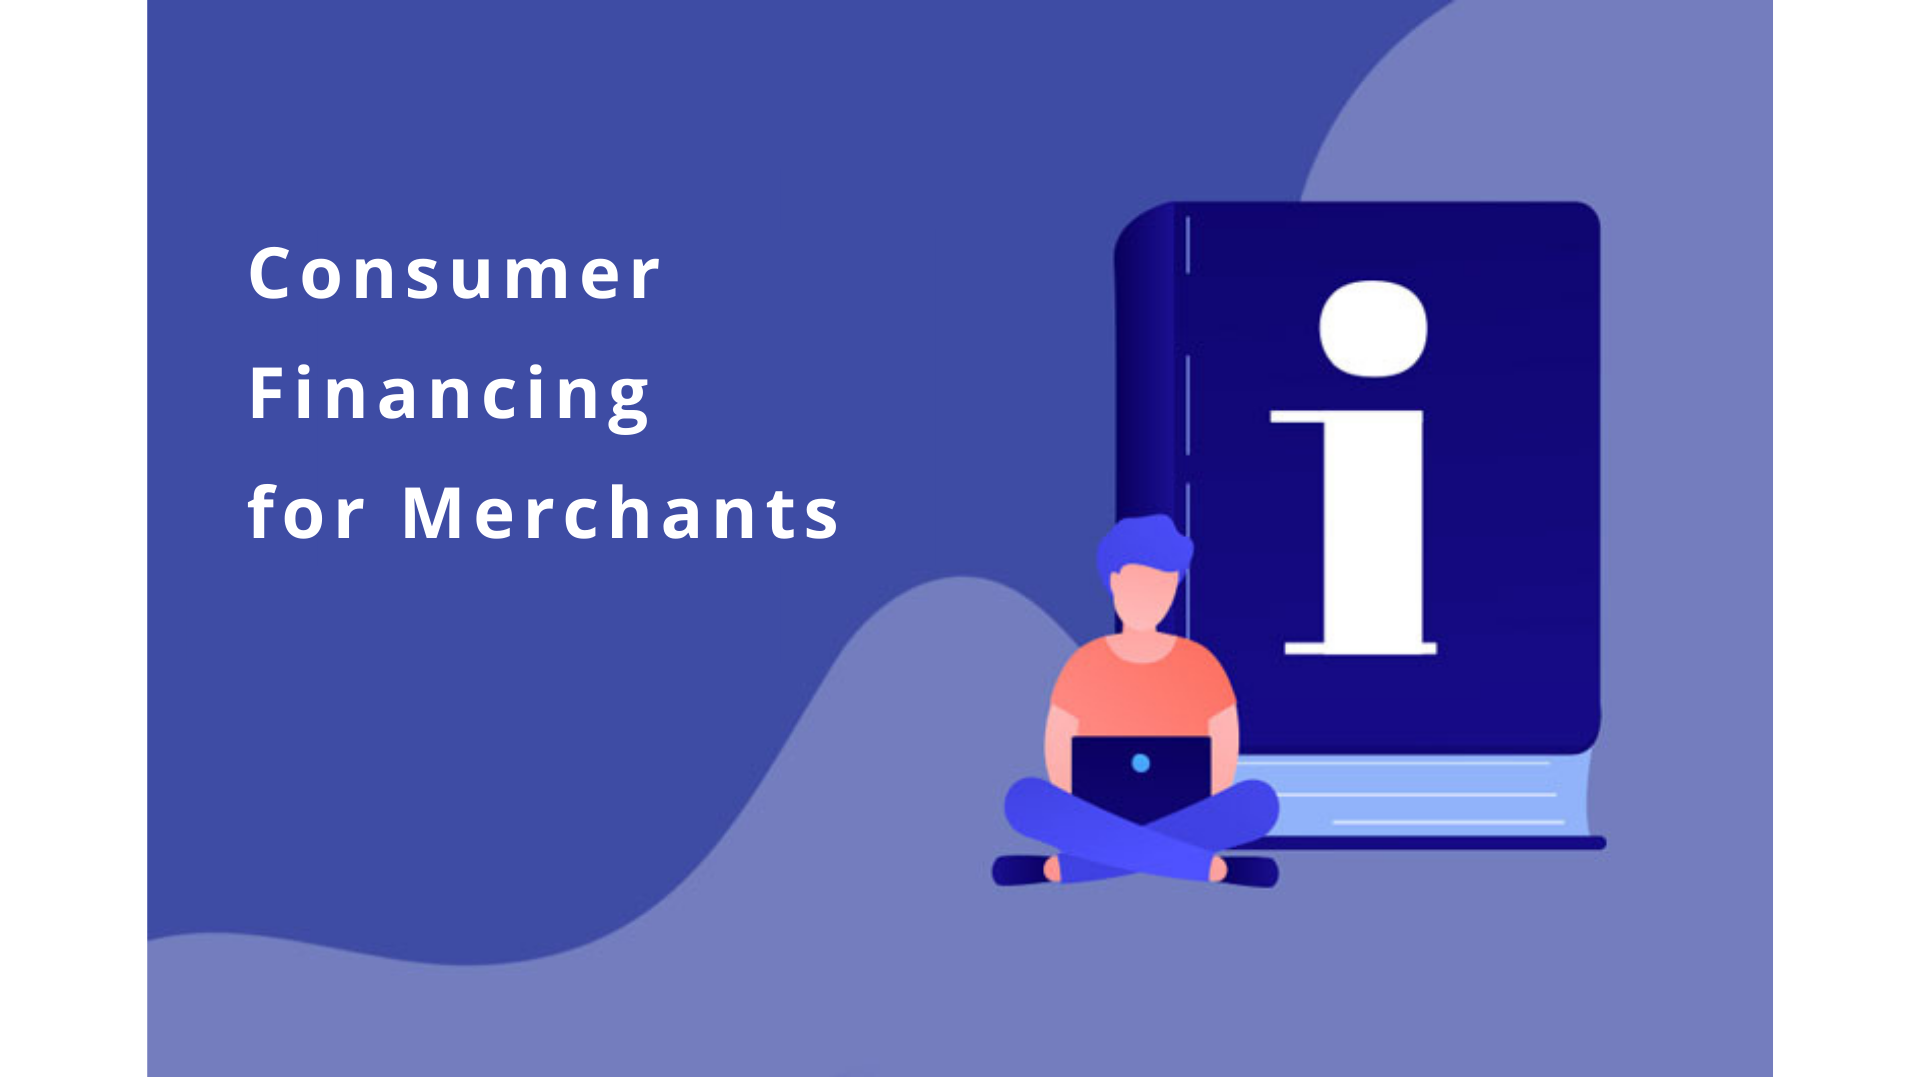 Consumer Financing for Merchants: Small Business Guide